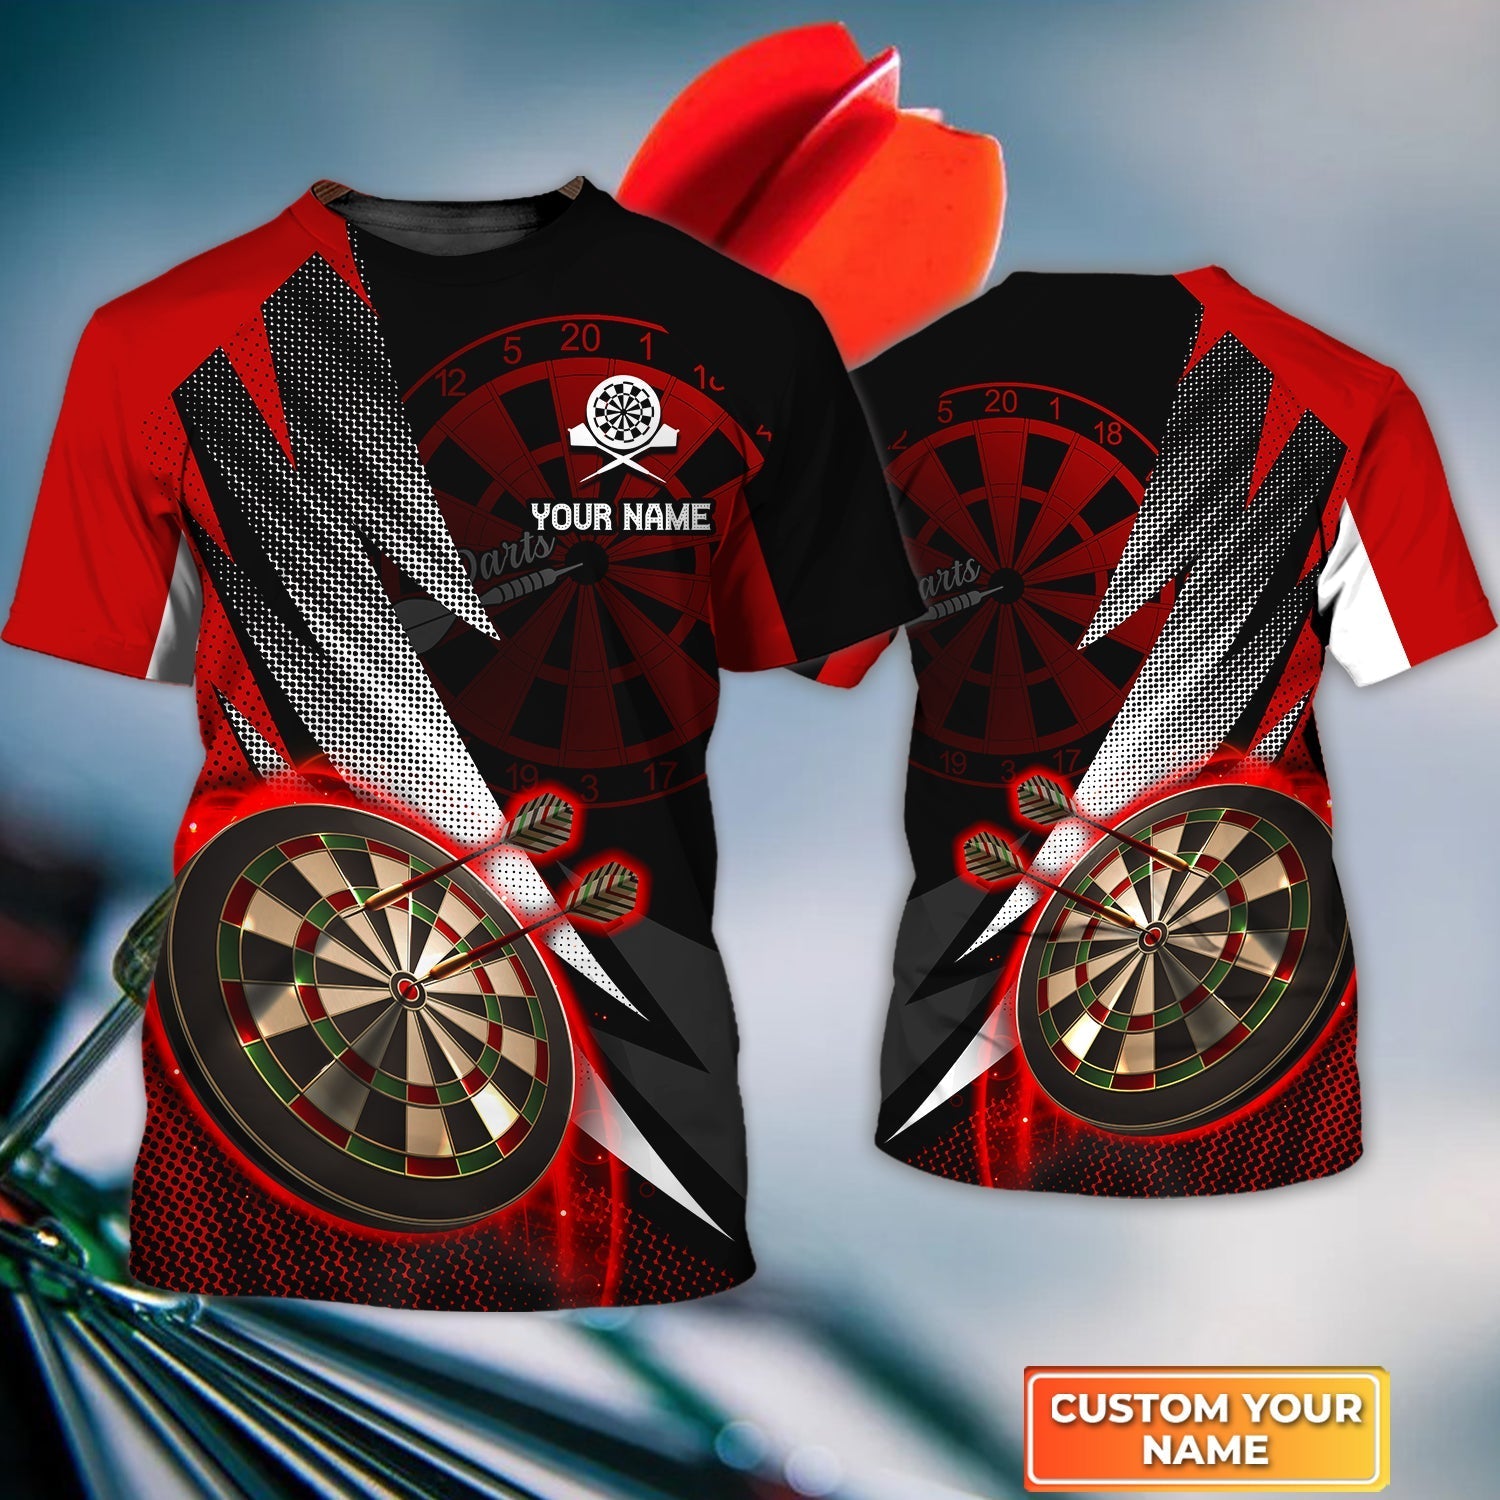 Red Darts shirt for Men, Personalized Name 3D Tshirt For Darts Player – DT108